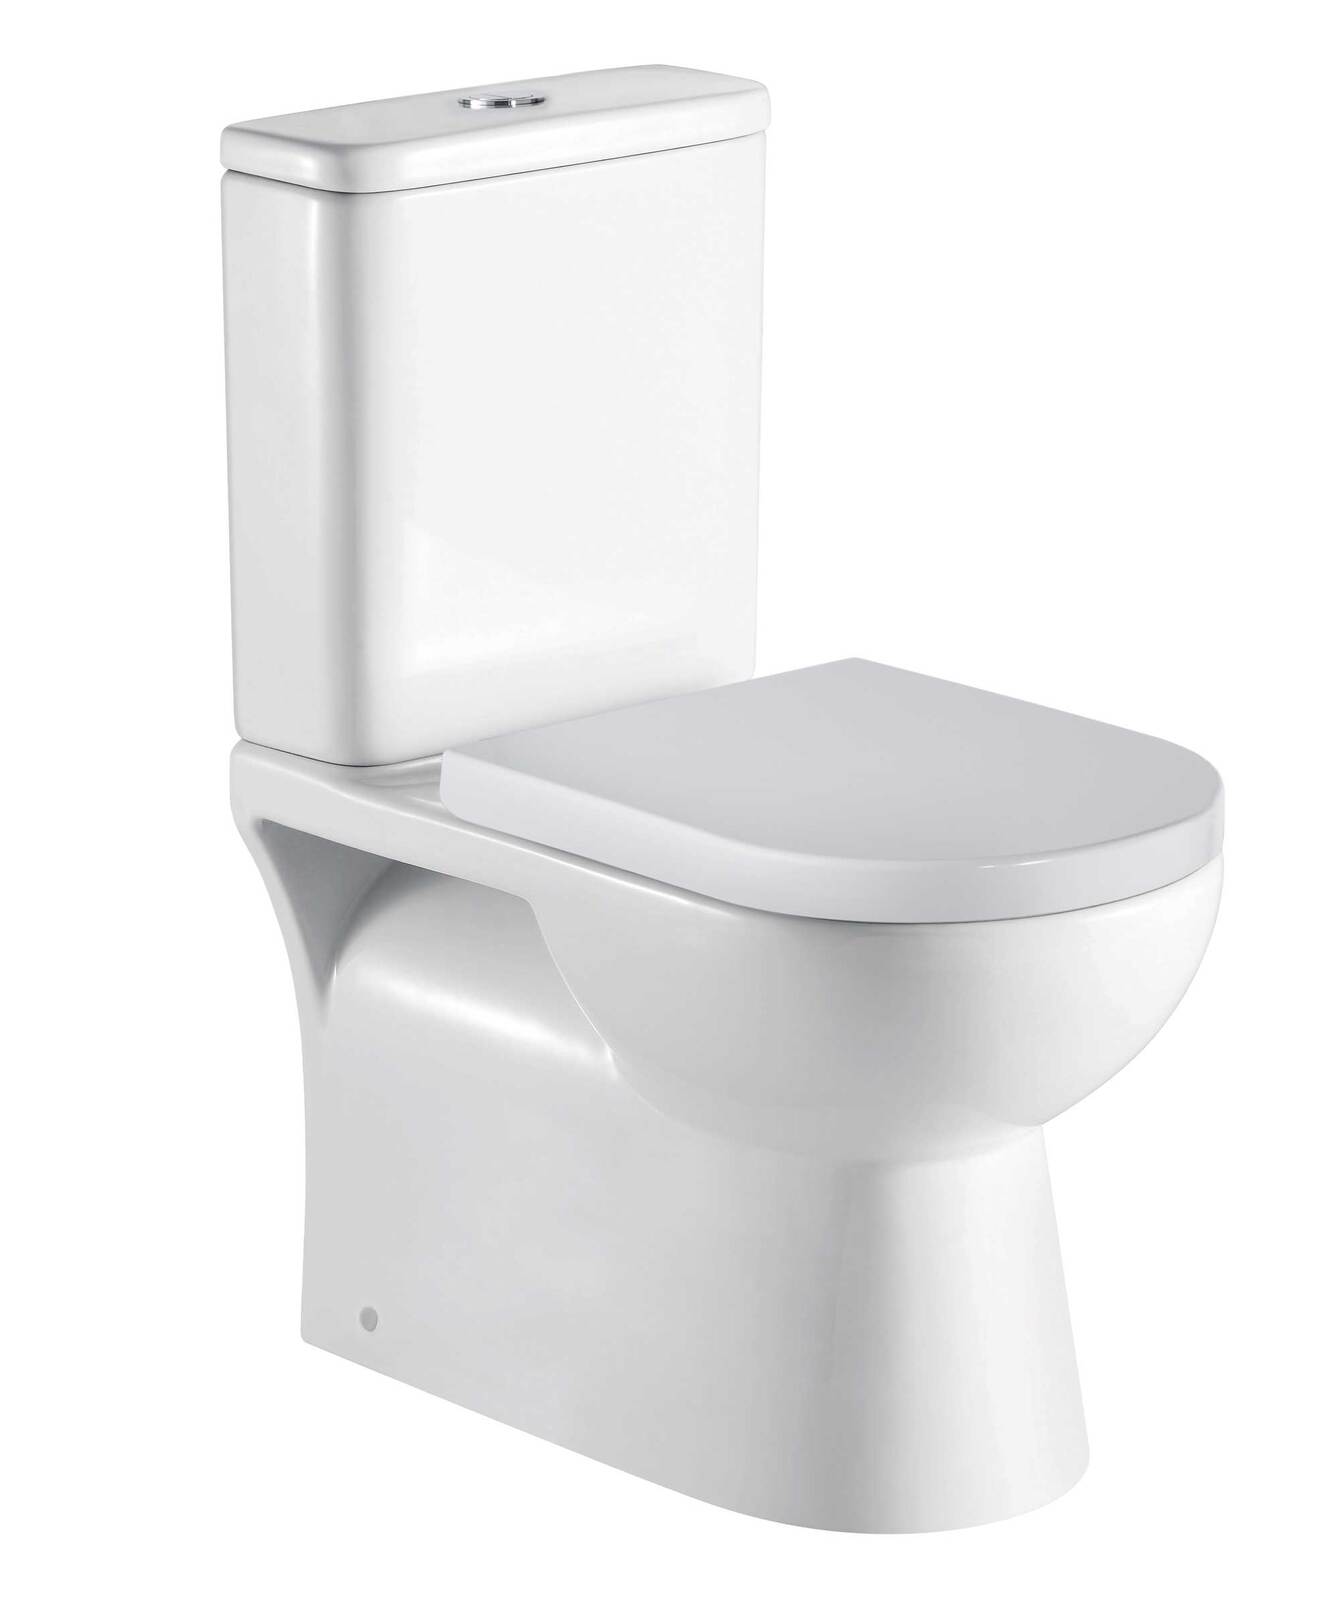 Seima Liara Wall Faced Toilet Suite with Classic Seat 191872